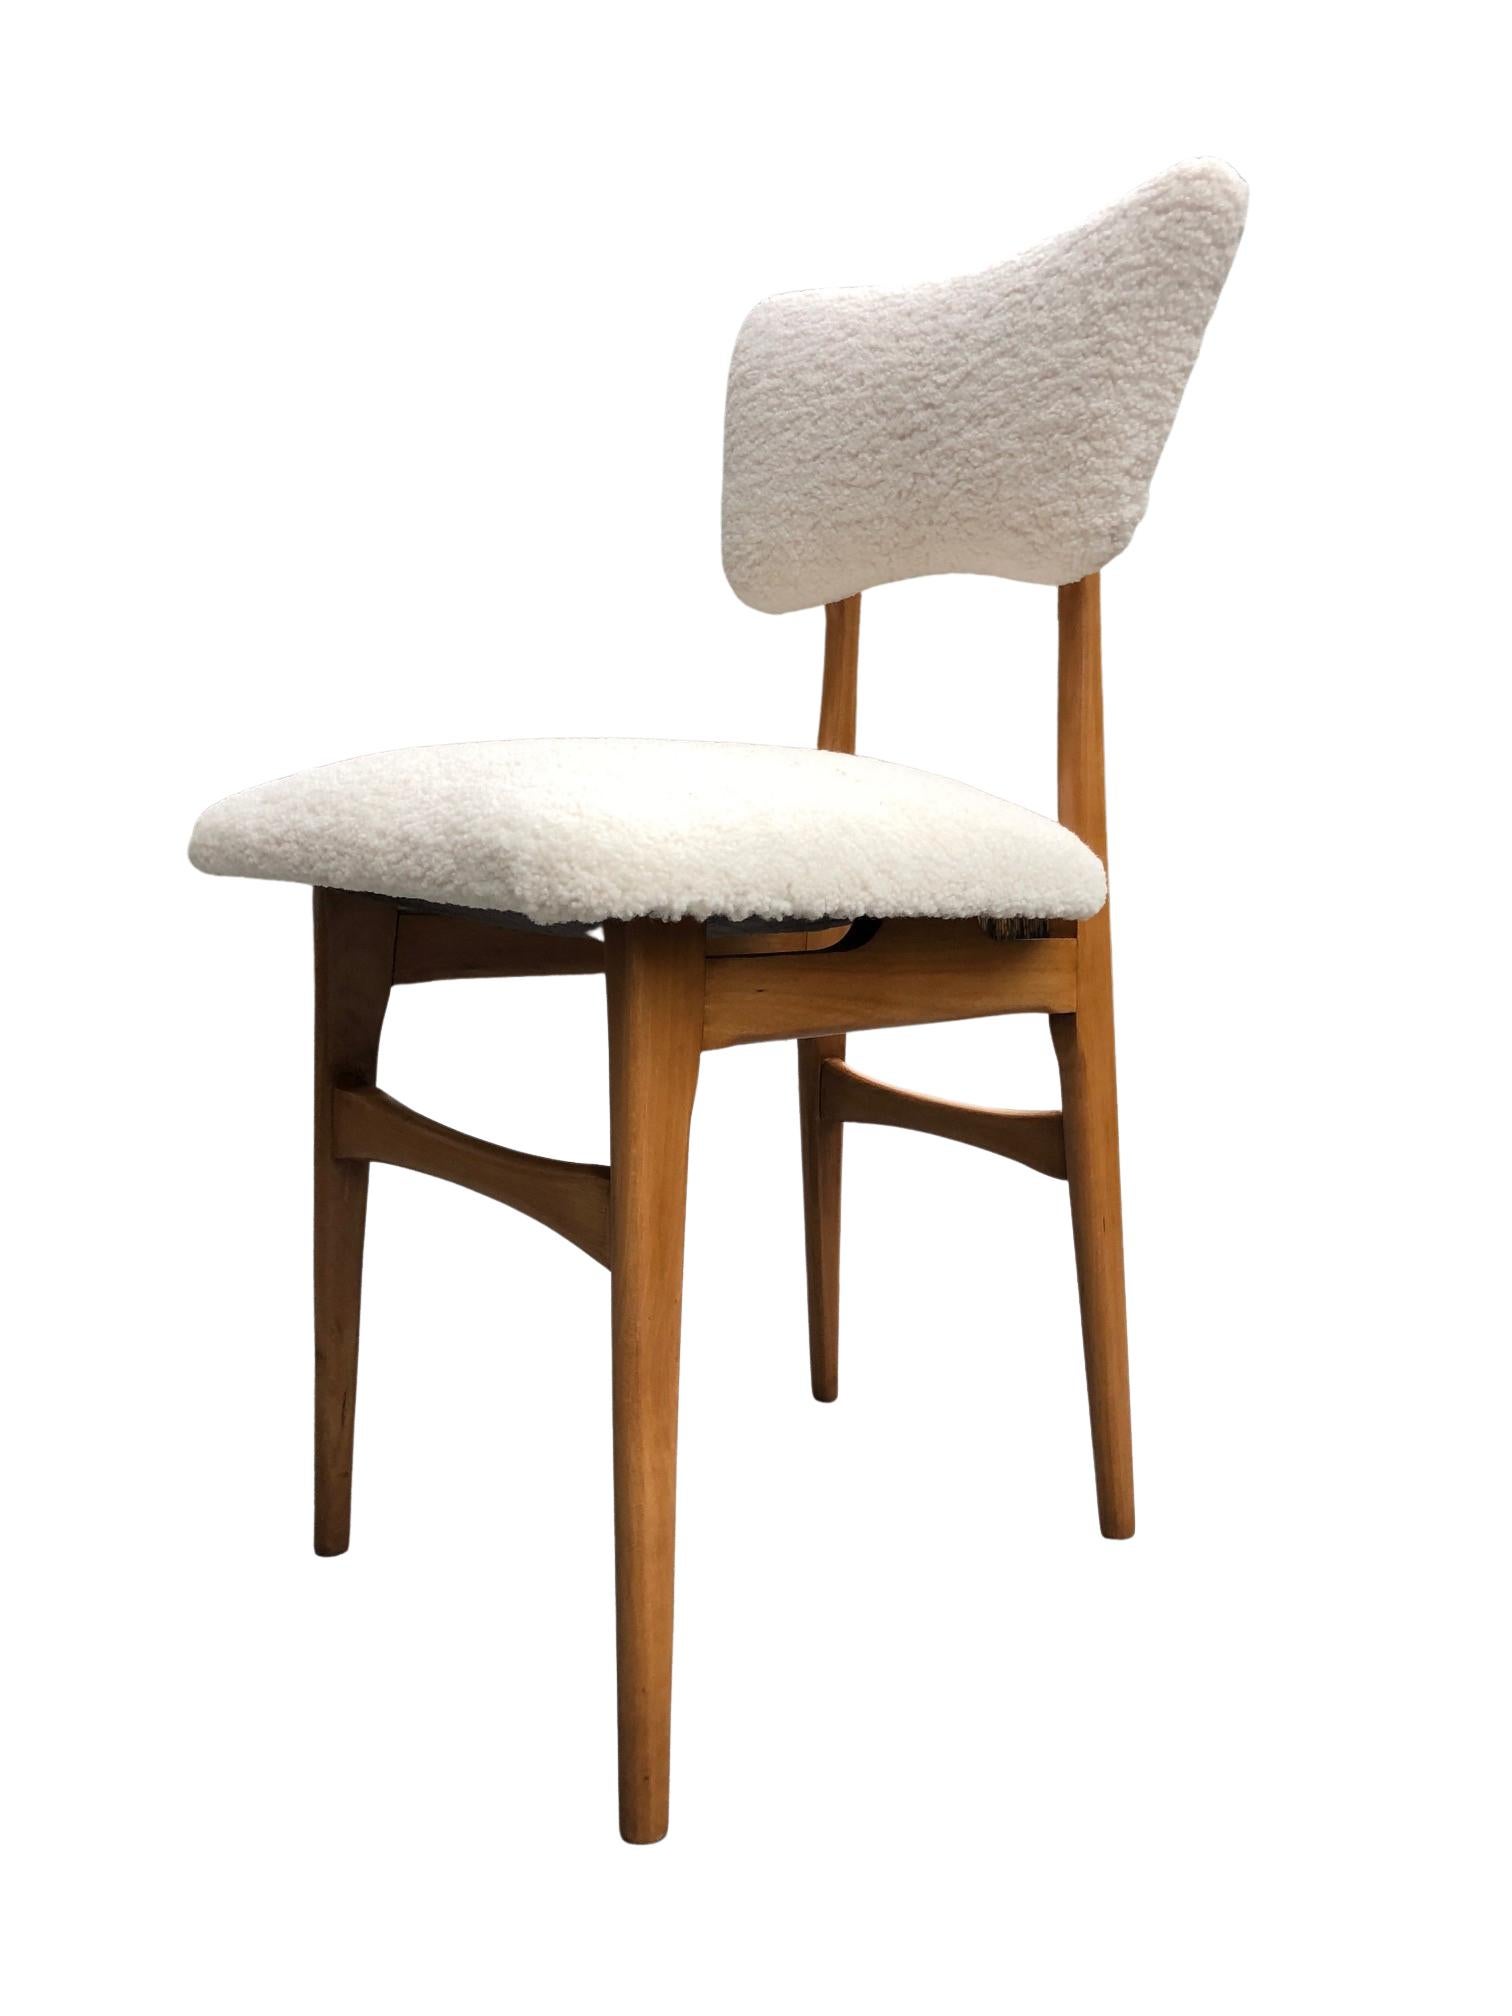 Hand-Crafted Midcentury Cream Bouclé and Wood Dining Chairs, Europe, 1960s, Set of Two For Sale